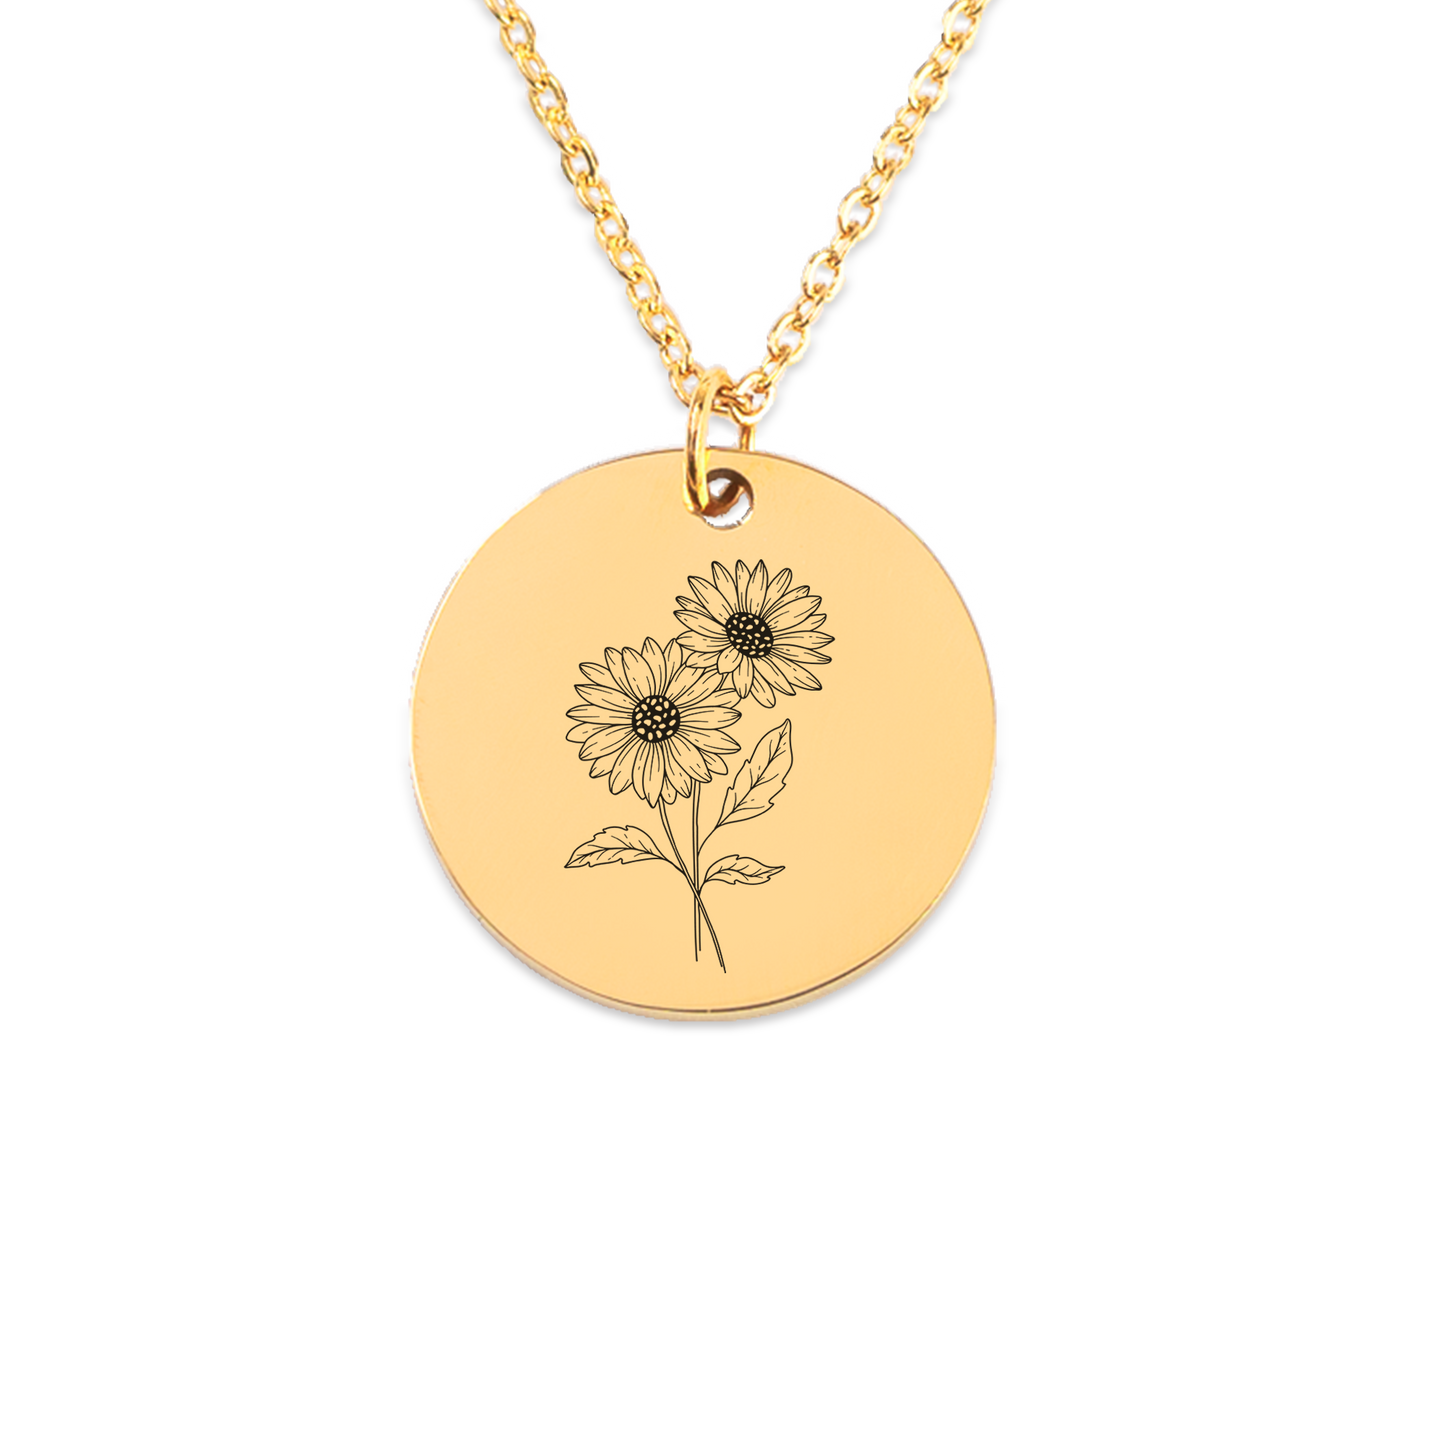 April Birth Flower Coin Necklace (Daisy)